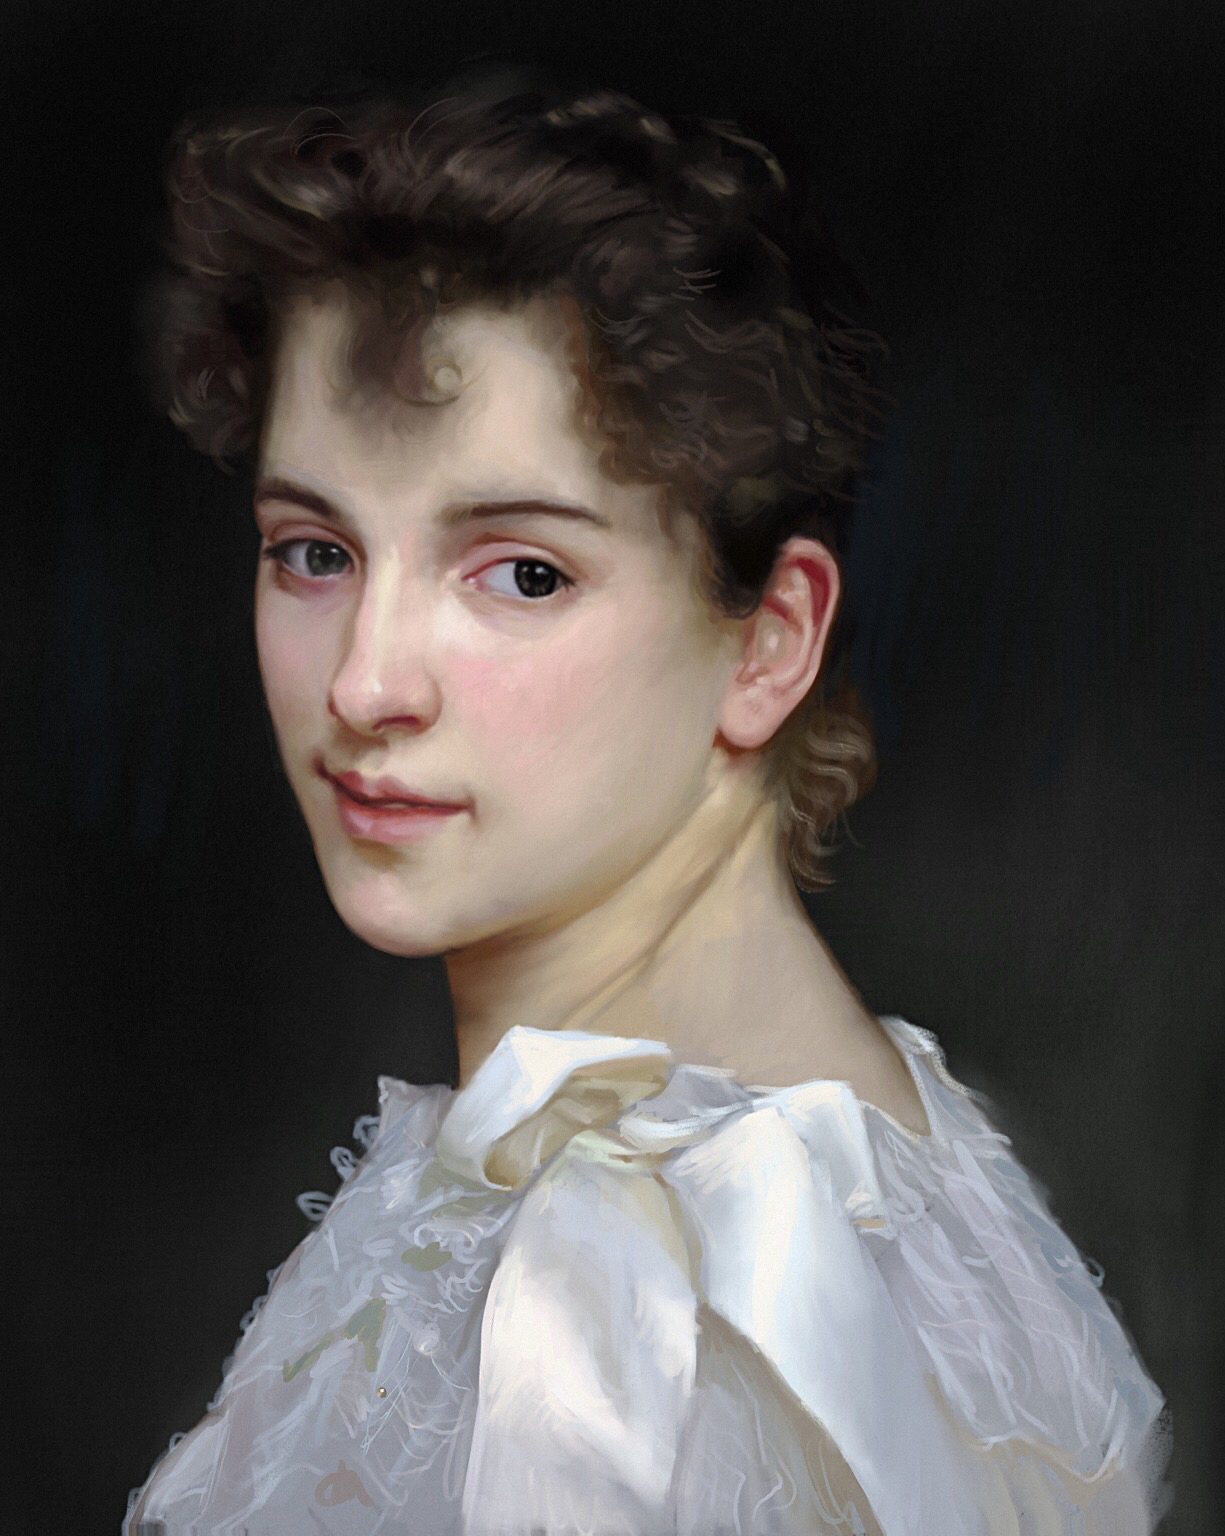 Digital painting based on Bouguereau’s portrait of Gabrielle Cot. . Brown haired fair skinned woman on a dark background.